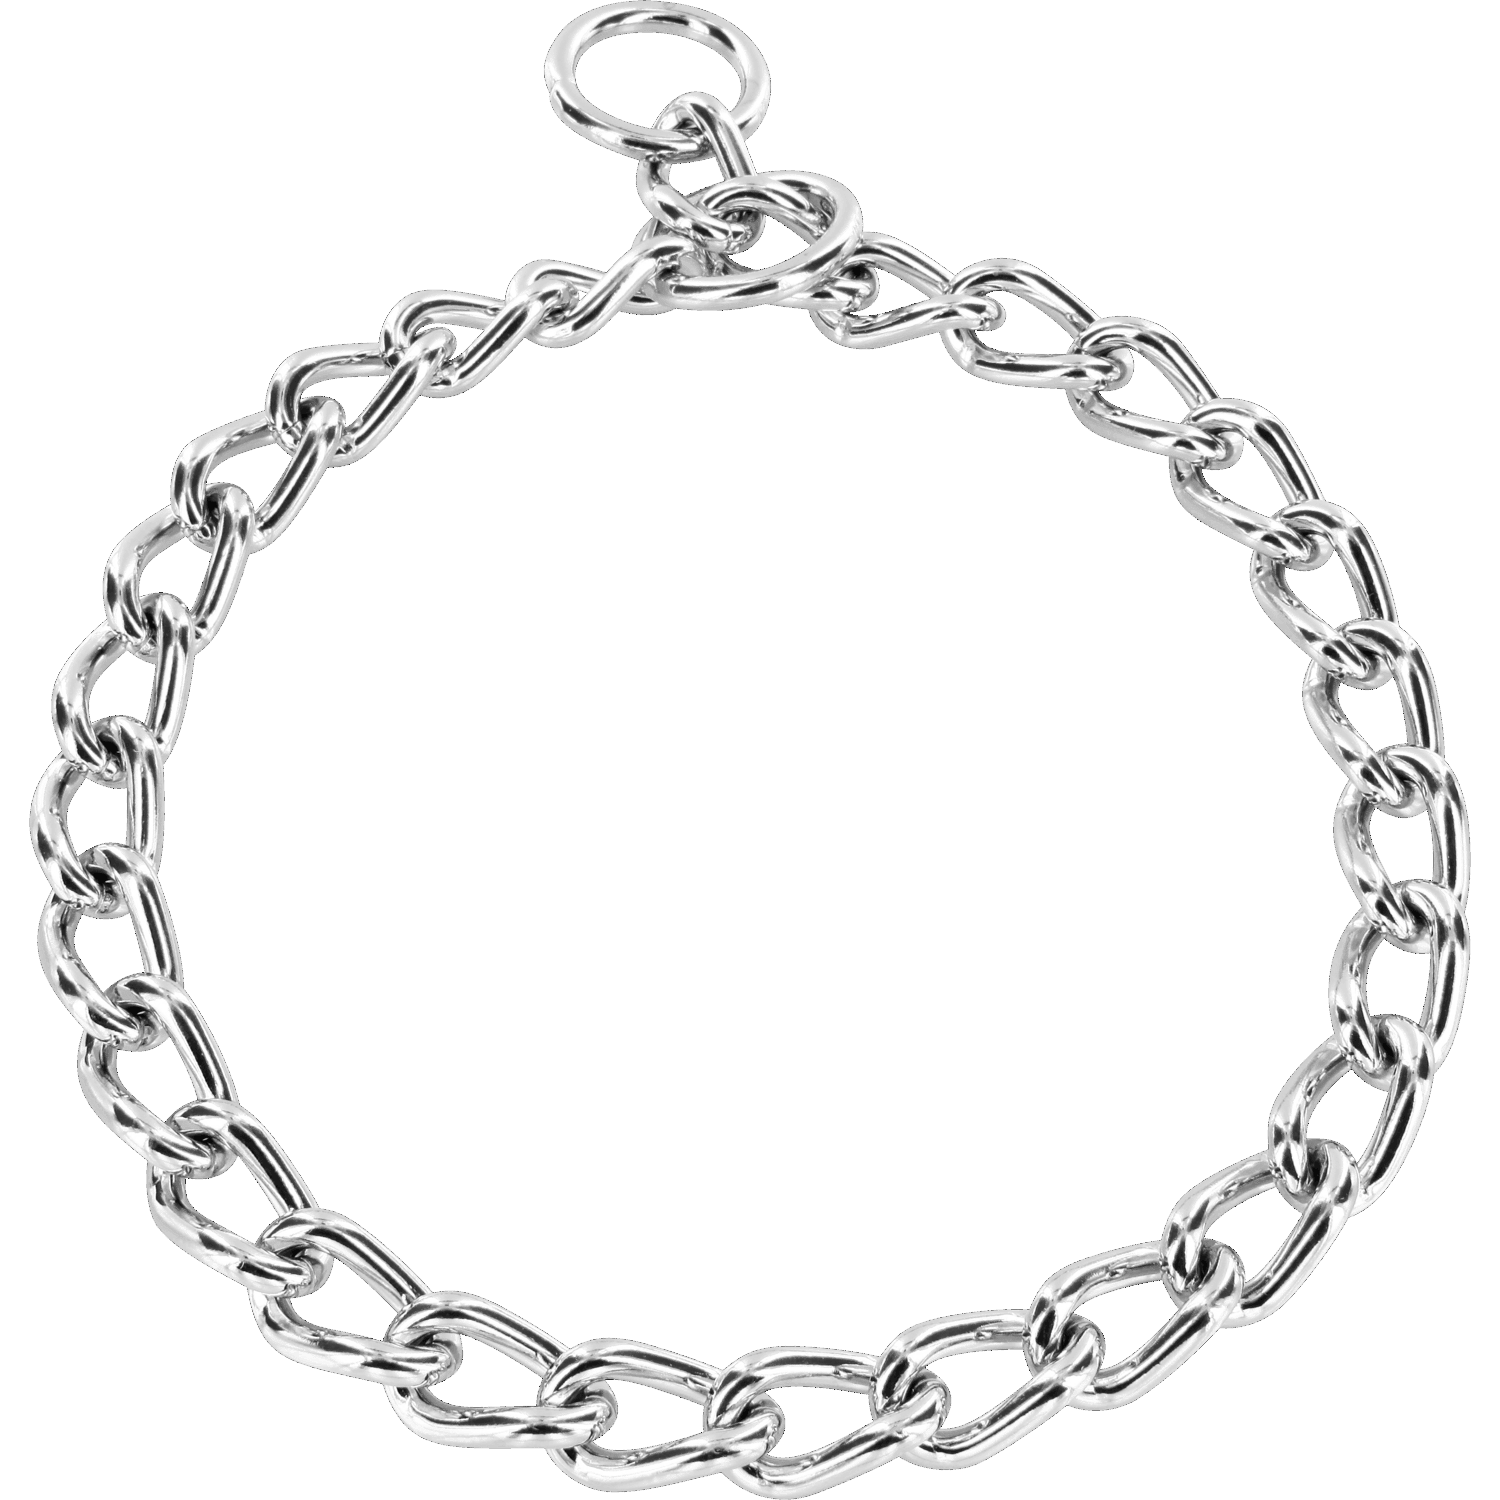 Round Chain Link Collar (Steel Chrome-Plated) - 5mm